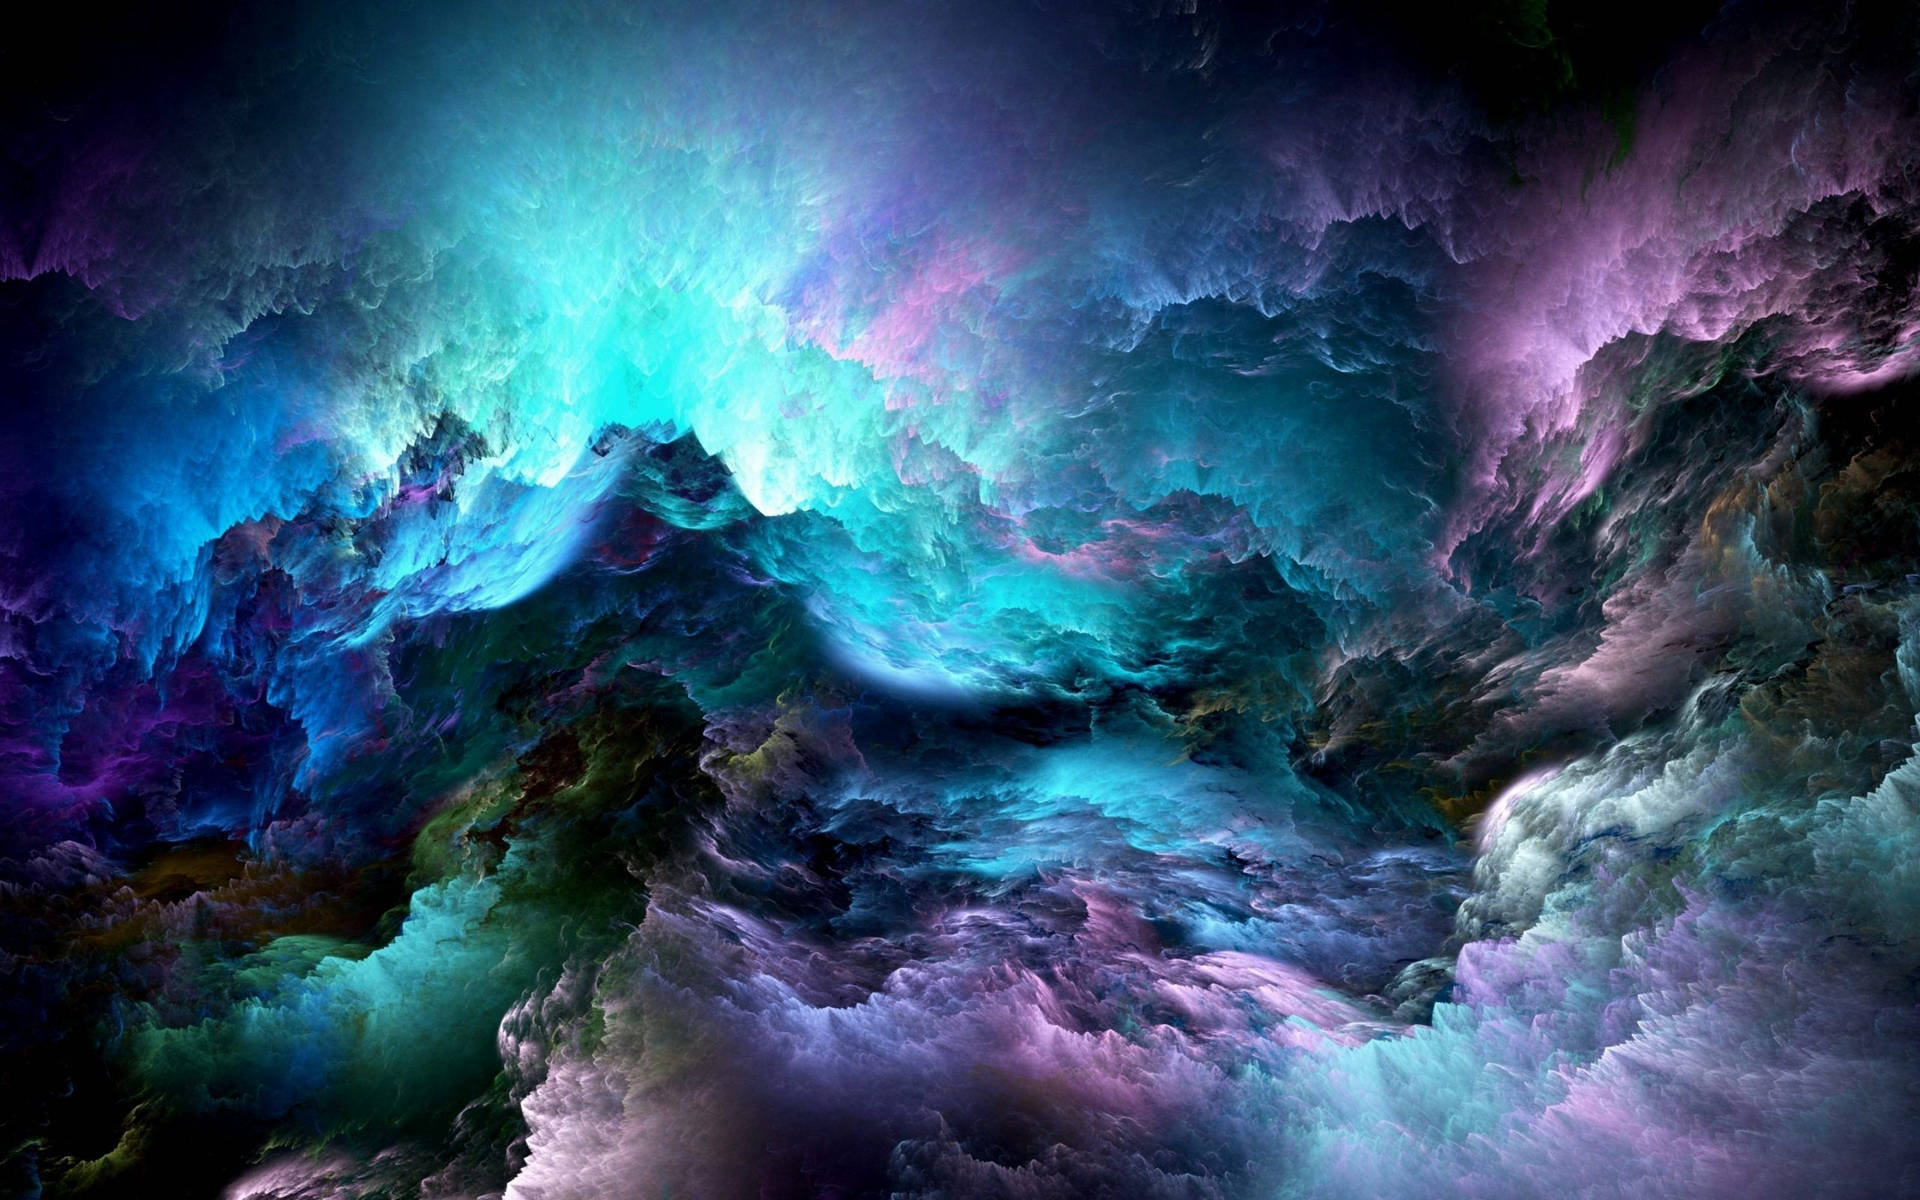 “The Art of Translation - Interpreting Clouds Through Abstract Art.” Wallpaper